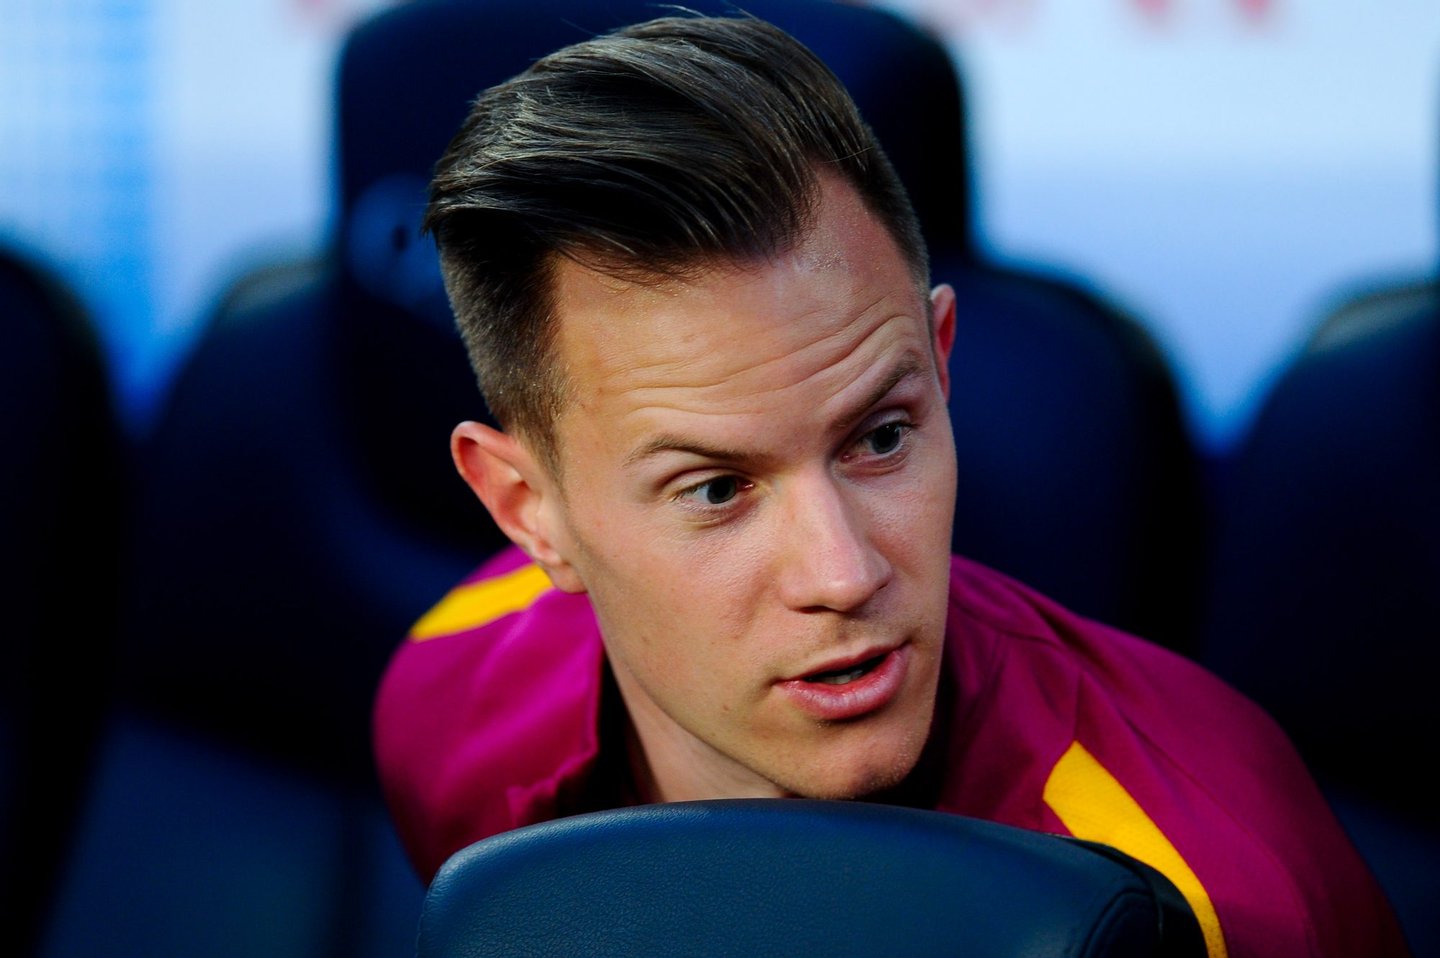 BARCELONA, SPAIN - APRIL 17: Marc-Andre Ter Stegen of FC Barcelona looks on from the bench during the La Liga match between FC Barcelona and Valencia CF at Camp Nou on April 17, 2016 in Barcelona, Spain. (Photo by David Ramos/Getty Images)